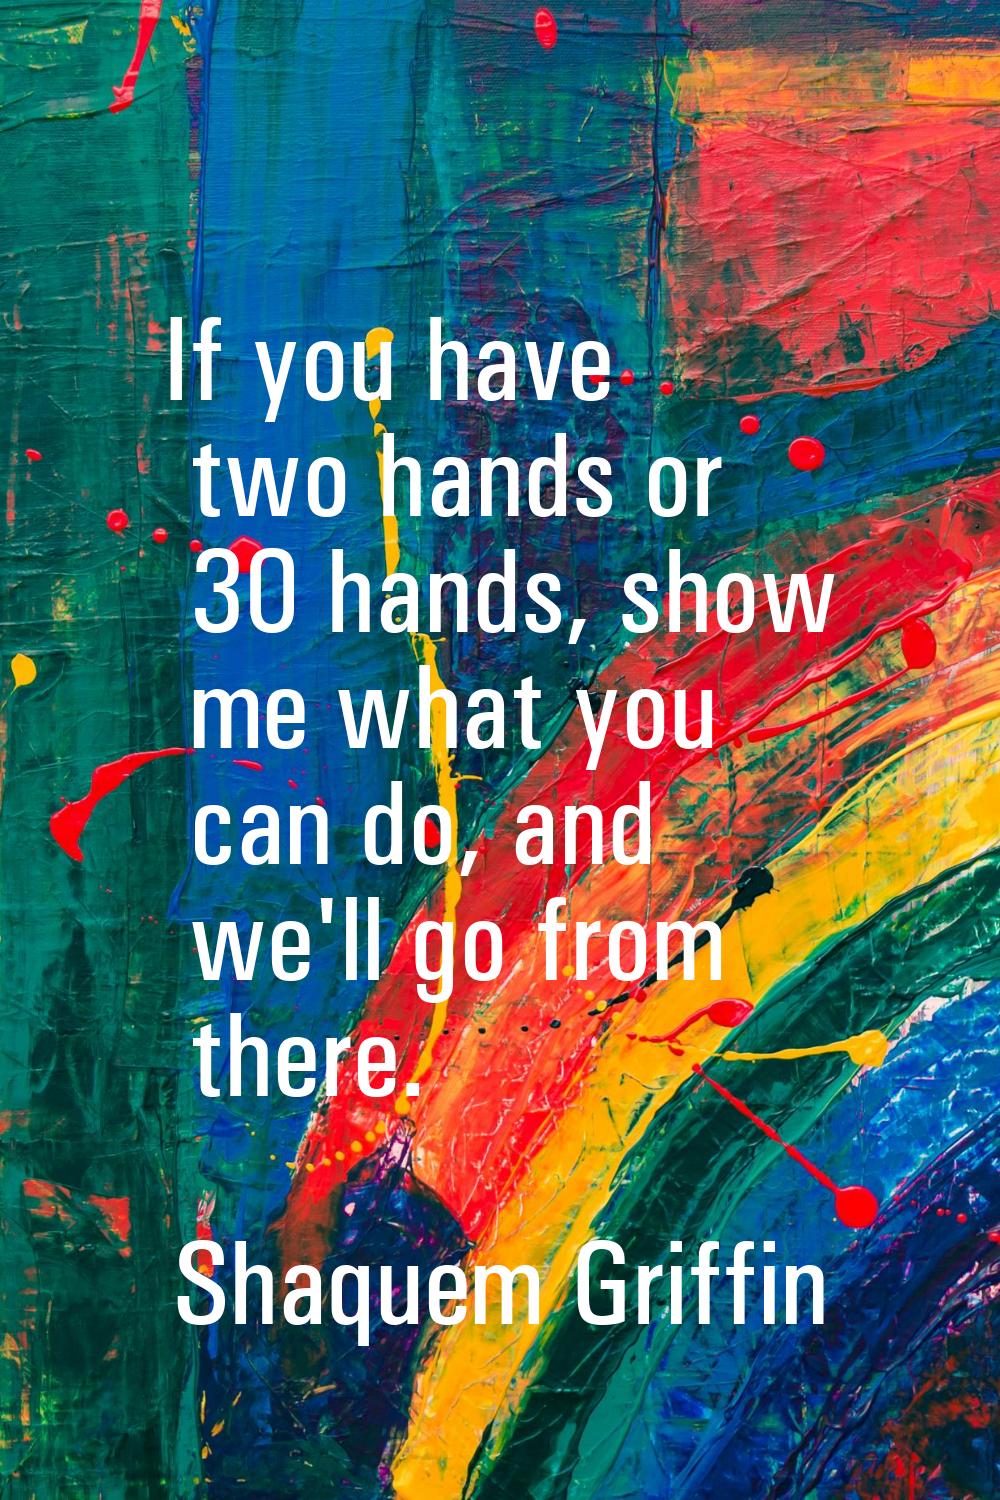 If you have two hands or 30 hands, show me what you can do, and we'll go from there.